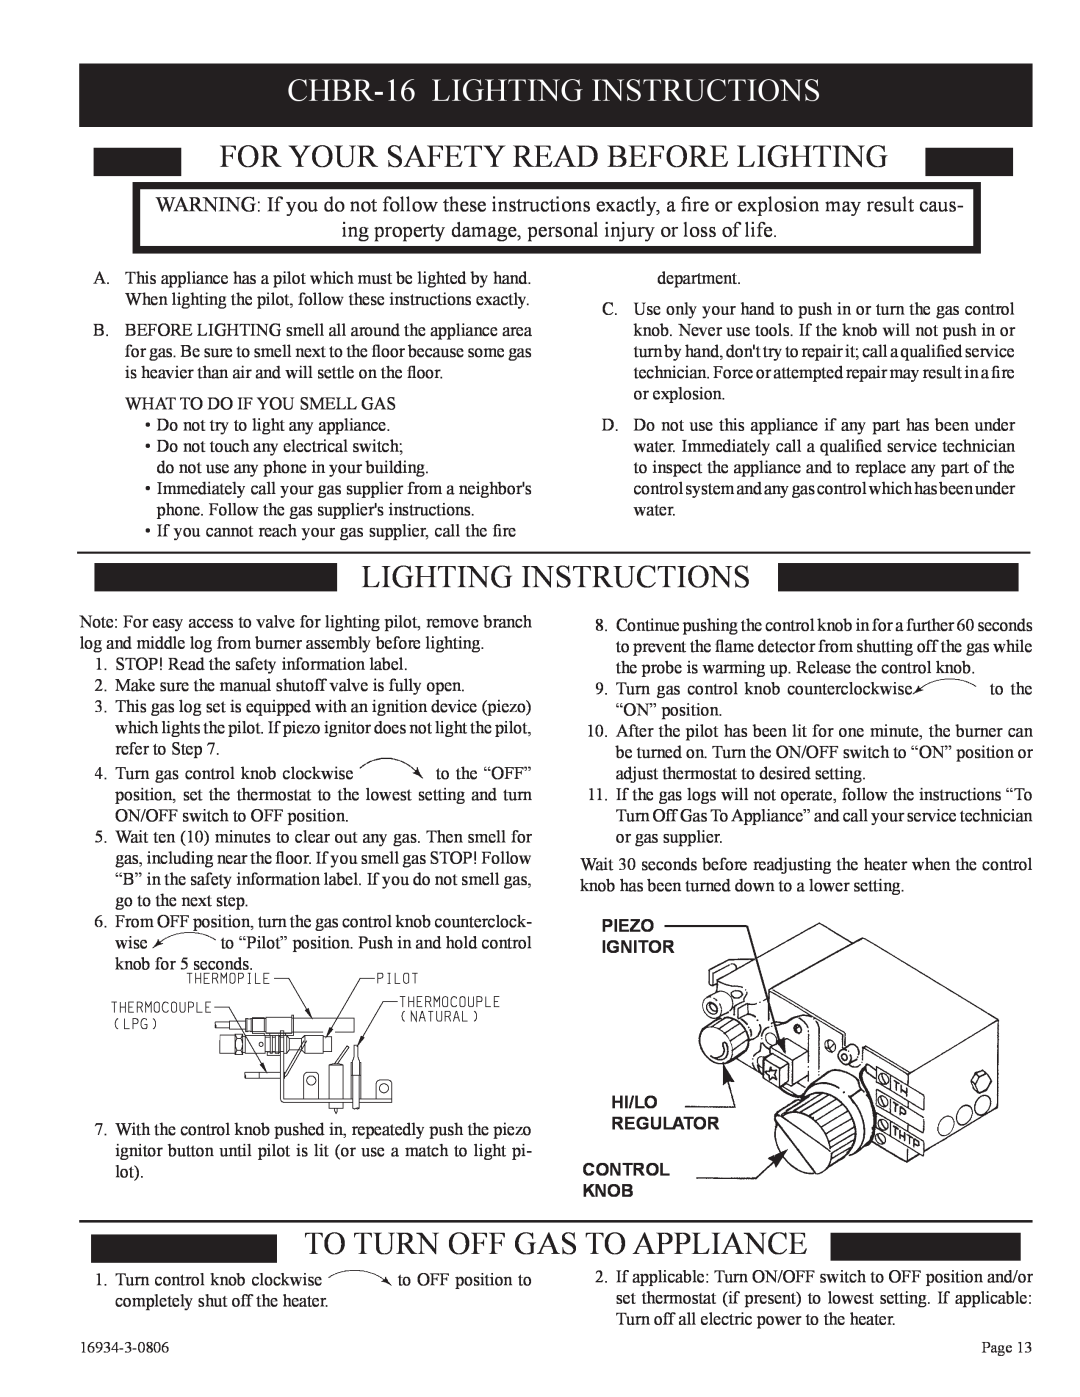 Empire Comfort Systems CHBR-16-3 CHBR-16LIGHTING INSTRUCTIONS, For Your Safety Read Before Lighting, Lighting Instructions 